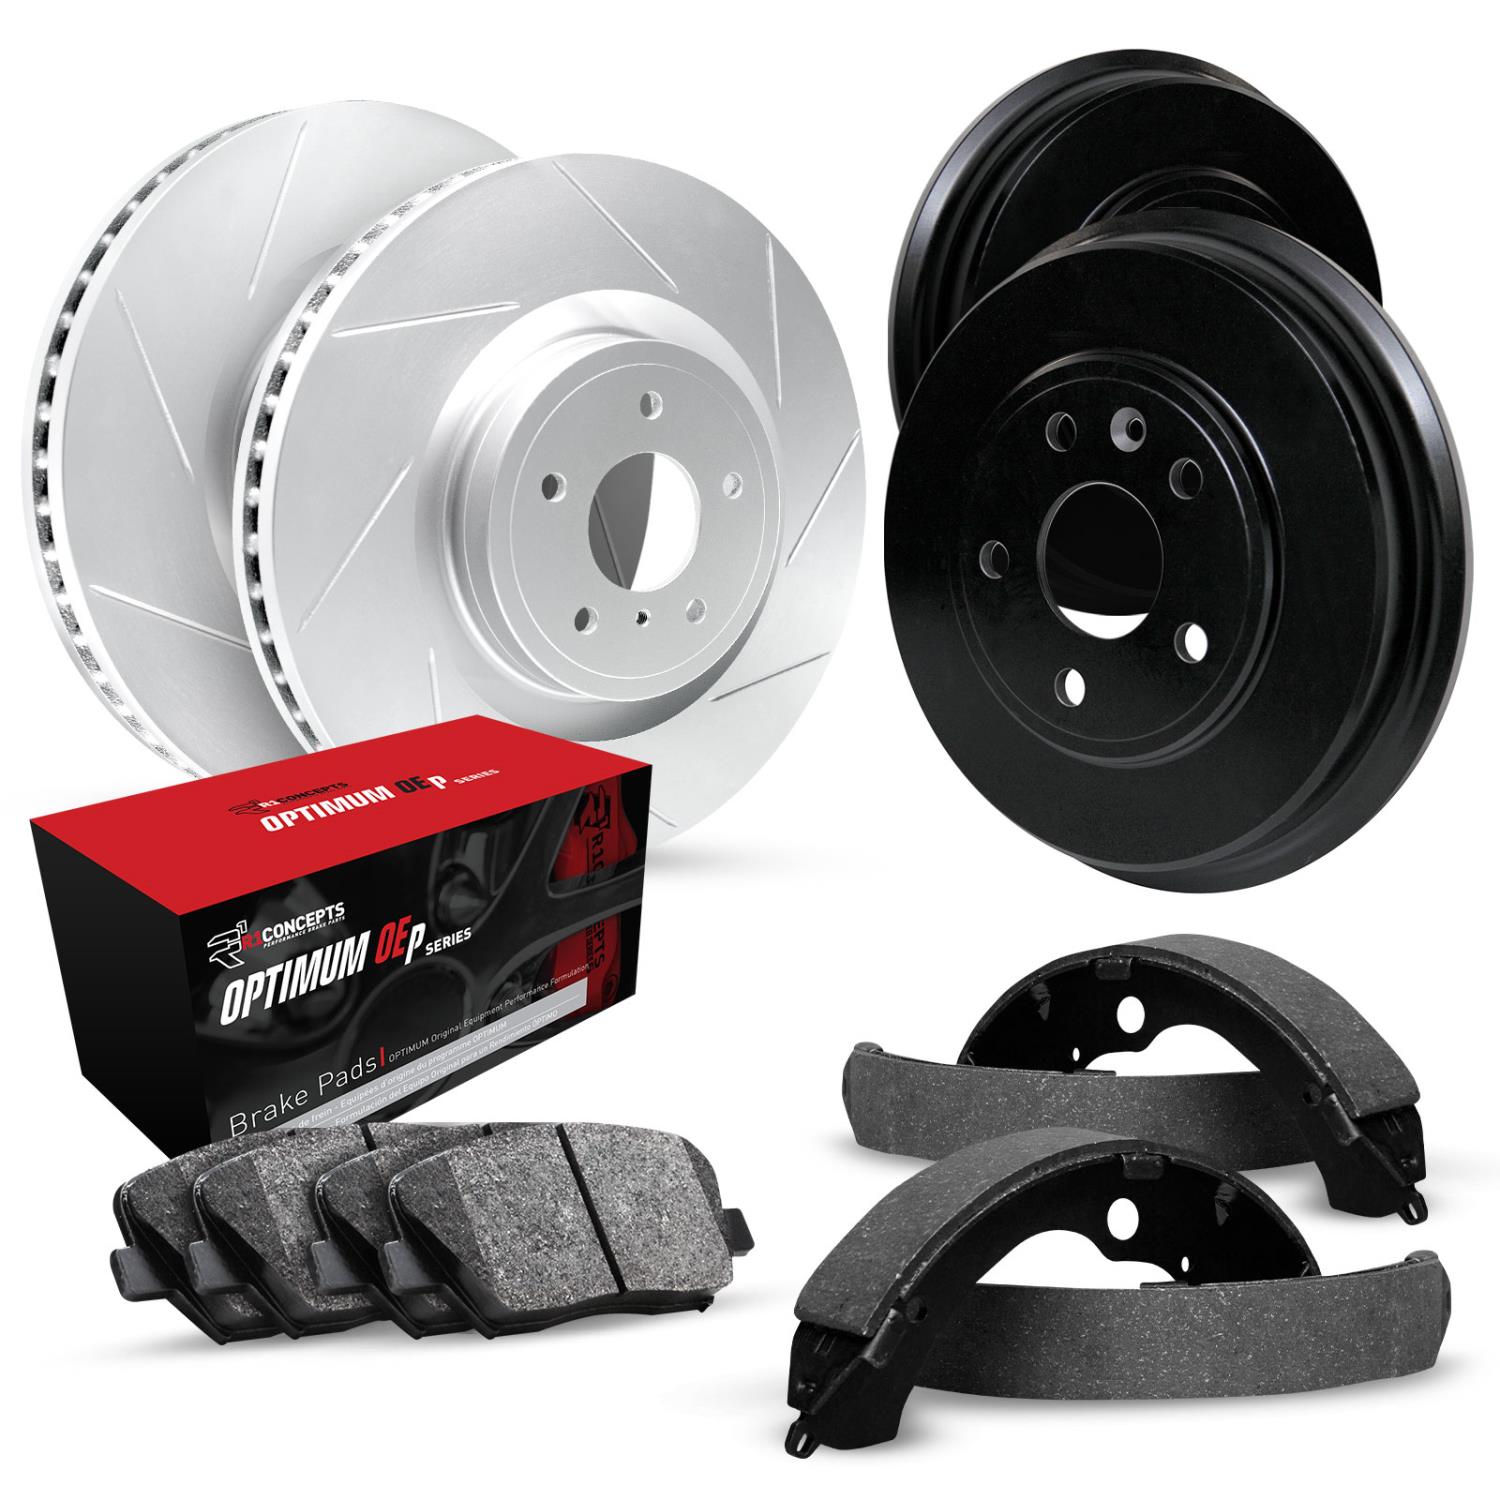 GEO-Carbon Slotted Brake Rotor & Drum Set w/Optimum OE Pads & Shoes, 1997-1999 GM, Position: Front & Rear